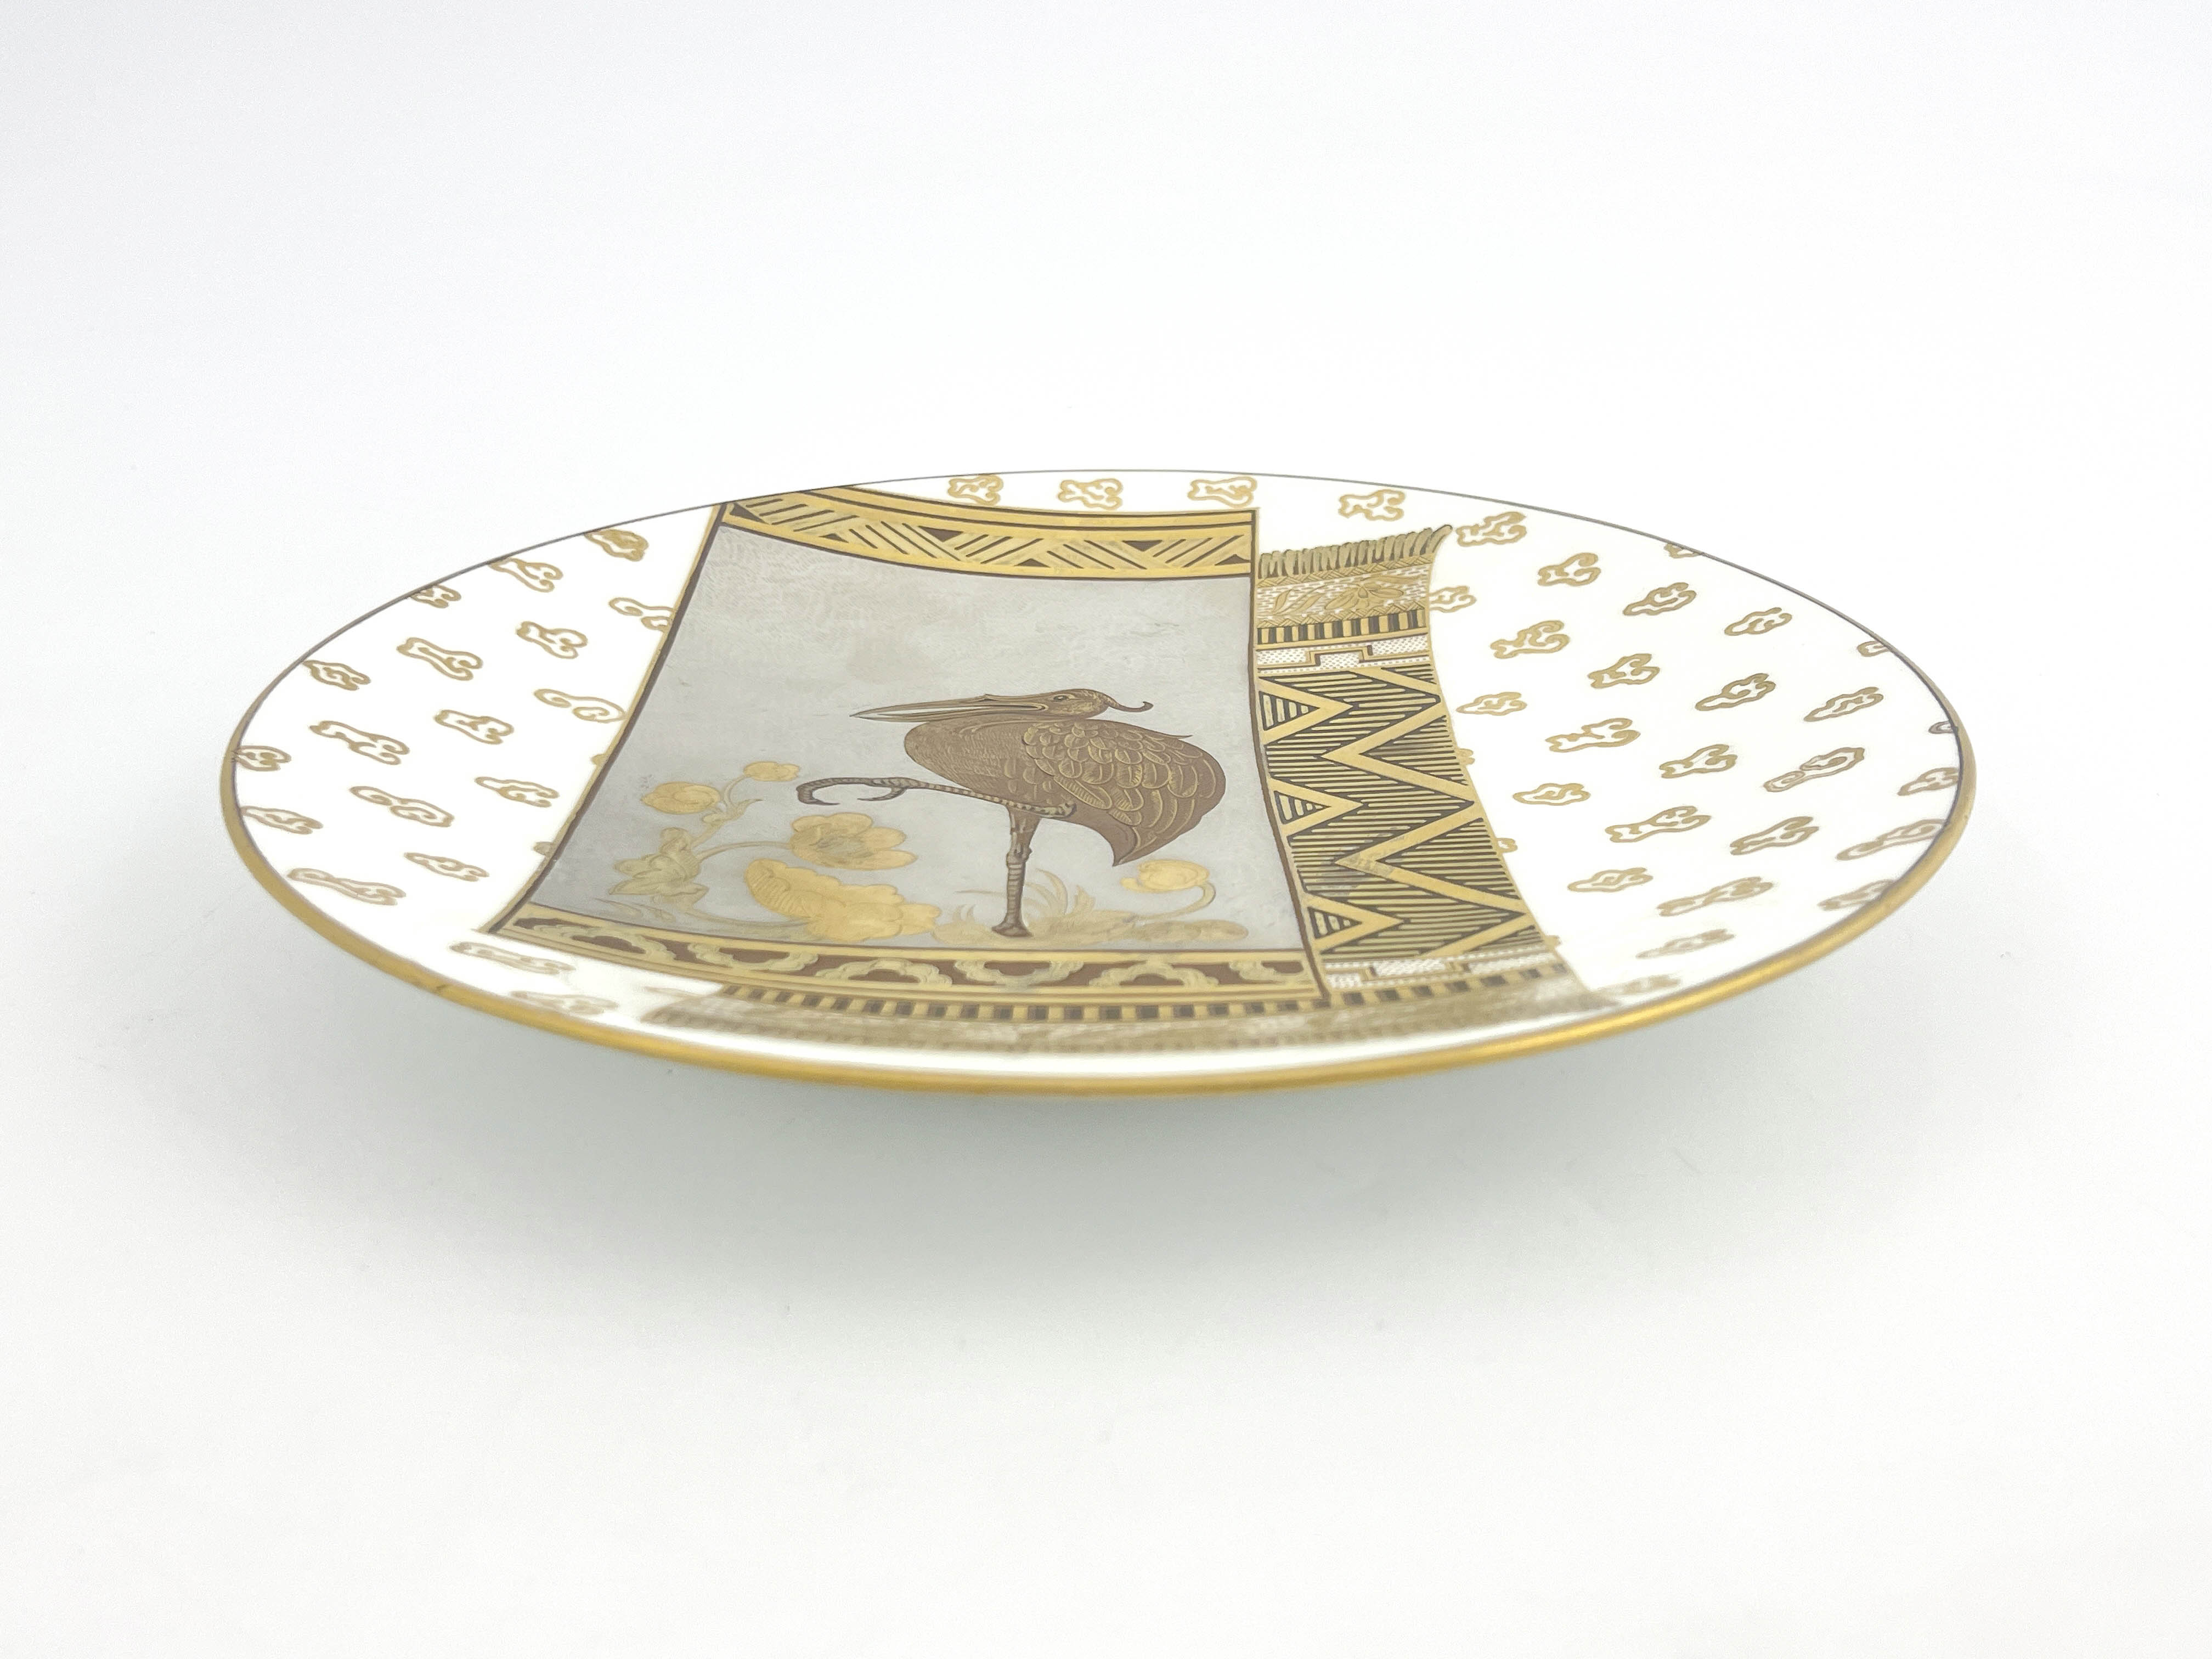 Christopher Dresser for Minton, an Aesthetic Movement plate - Image 2 of 3